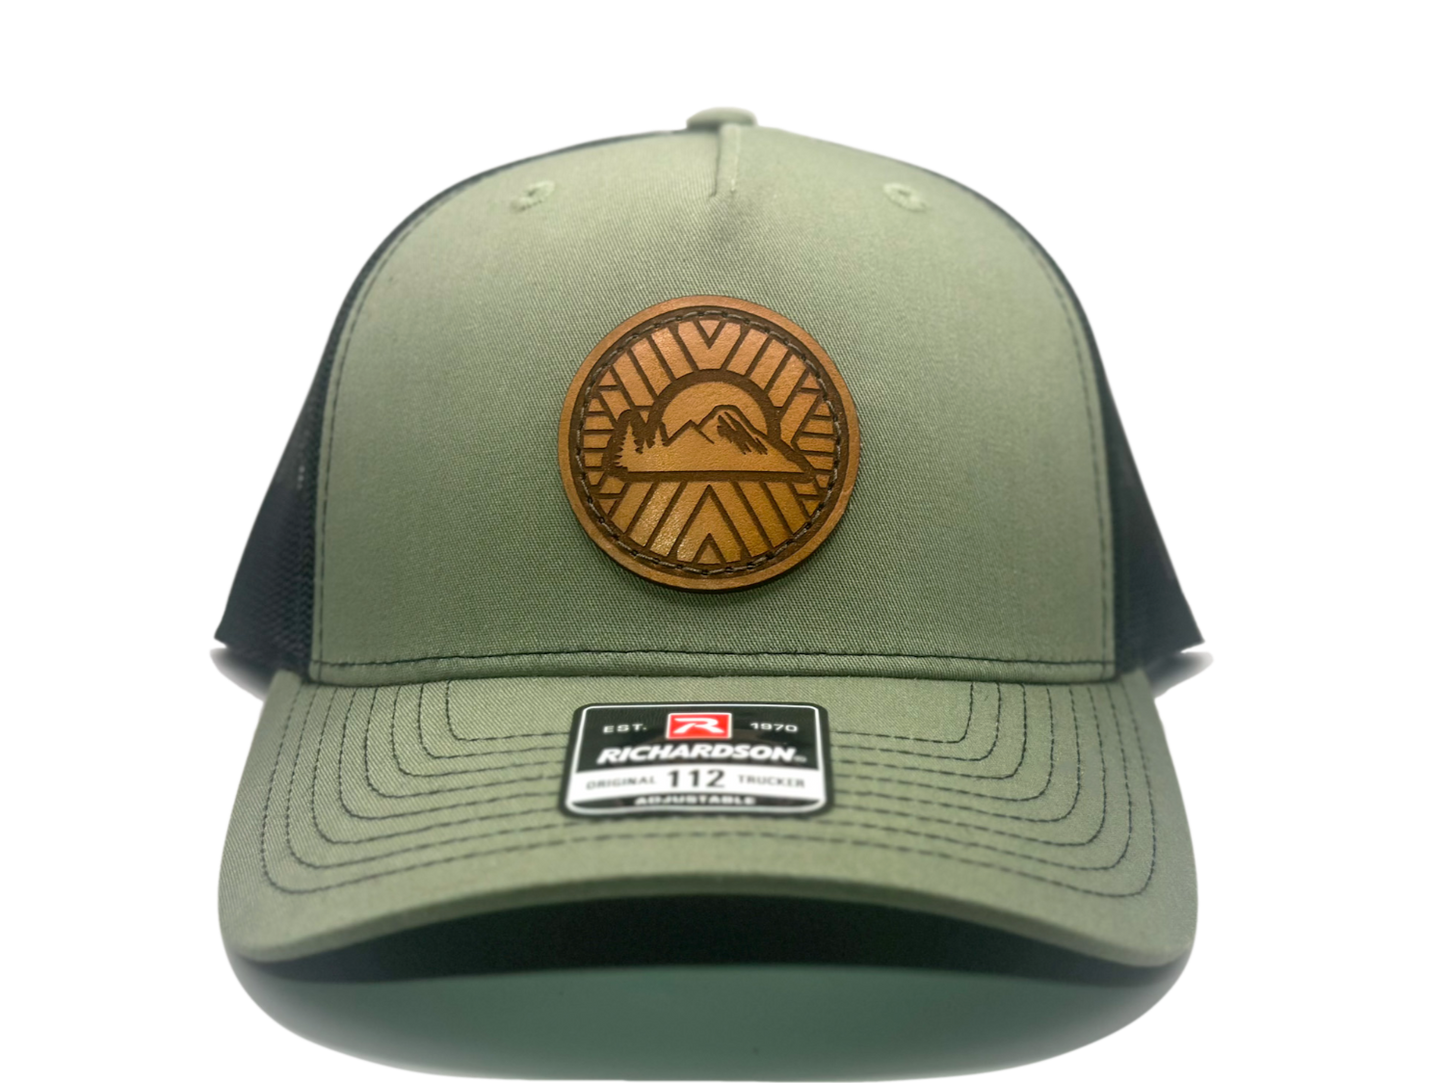 Custom Loden/black Richardson Leather Patch hat. Our custom designed leather patch is laser engraved and sewn onto a Richardson 112 Hat. We use full-grain, veg tanned leather. Our custom leather patches are handmade and designed in Colorado, USA.